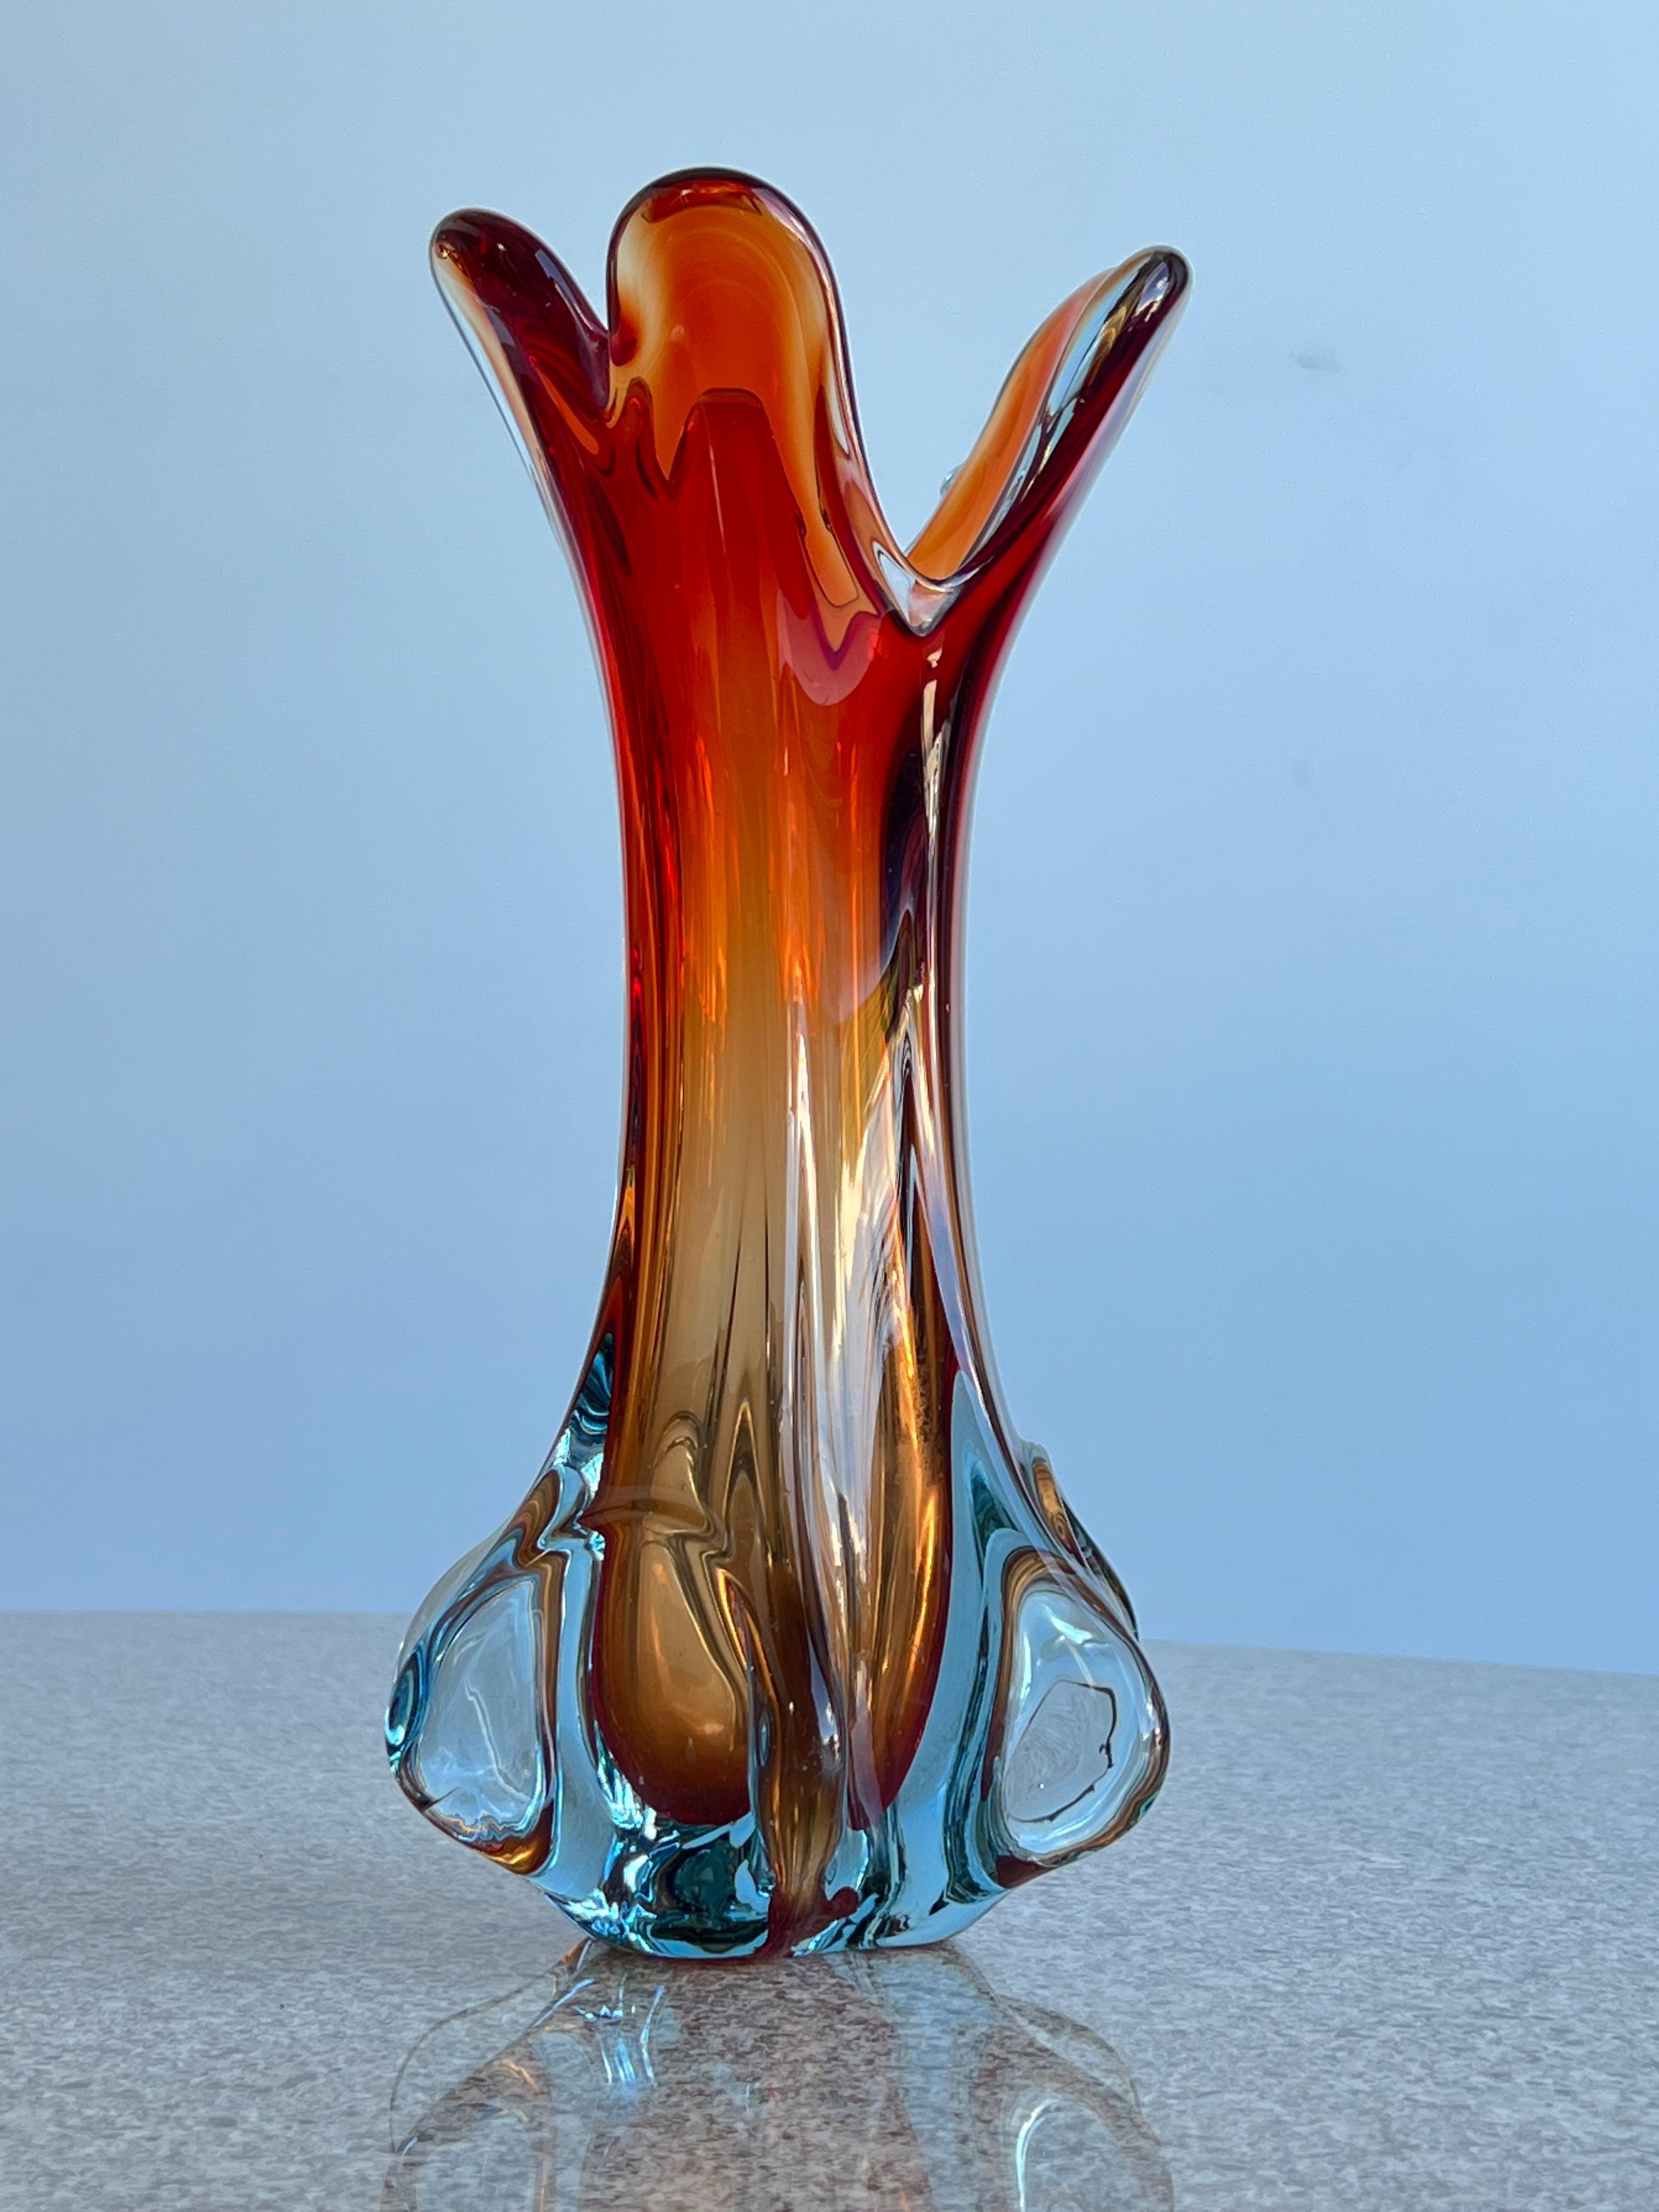 Colourful large mid-century Murano glass vase out of the famous glass art workshop Sommerso in Venezia Italy. Artfully made around 1960/70 this decorative, beautifully shaped glass vase impresses with its pleasing coloration going from a shining red